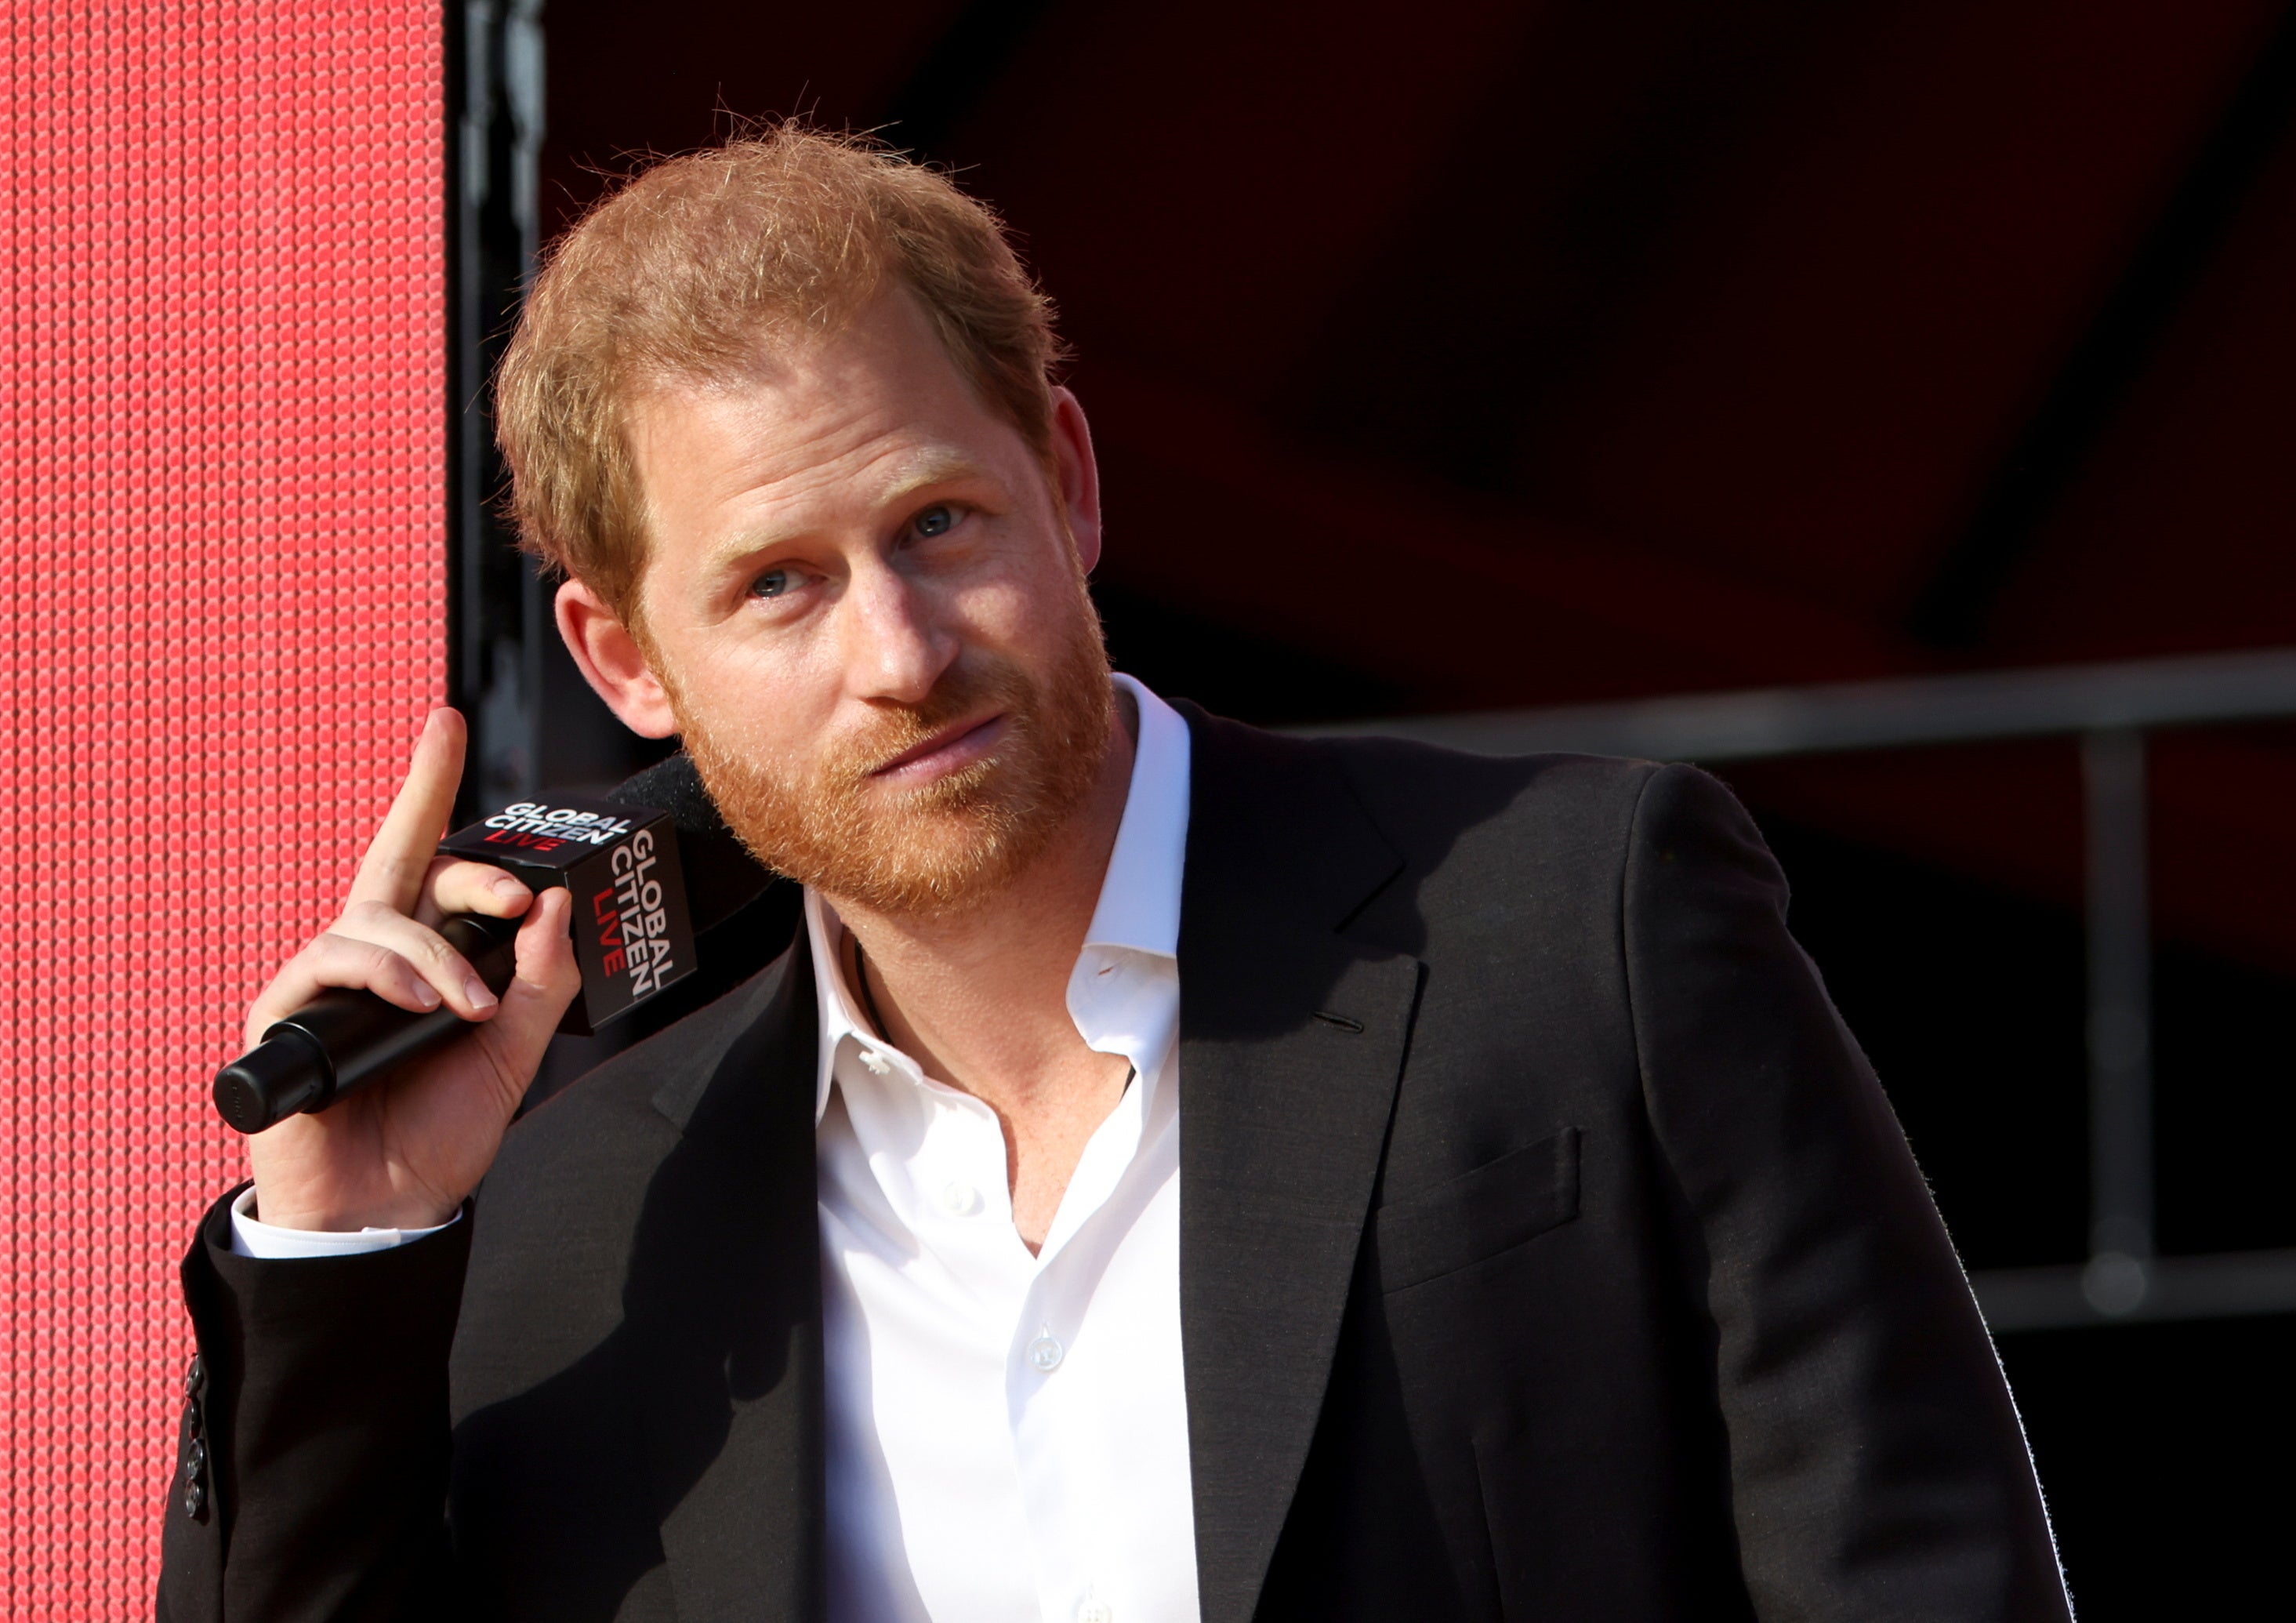 Prince Harry at the 2021 Global Citizen Live concert in New York on 25 September, 2021.